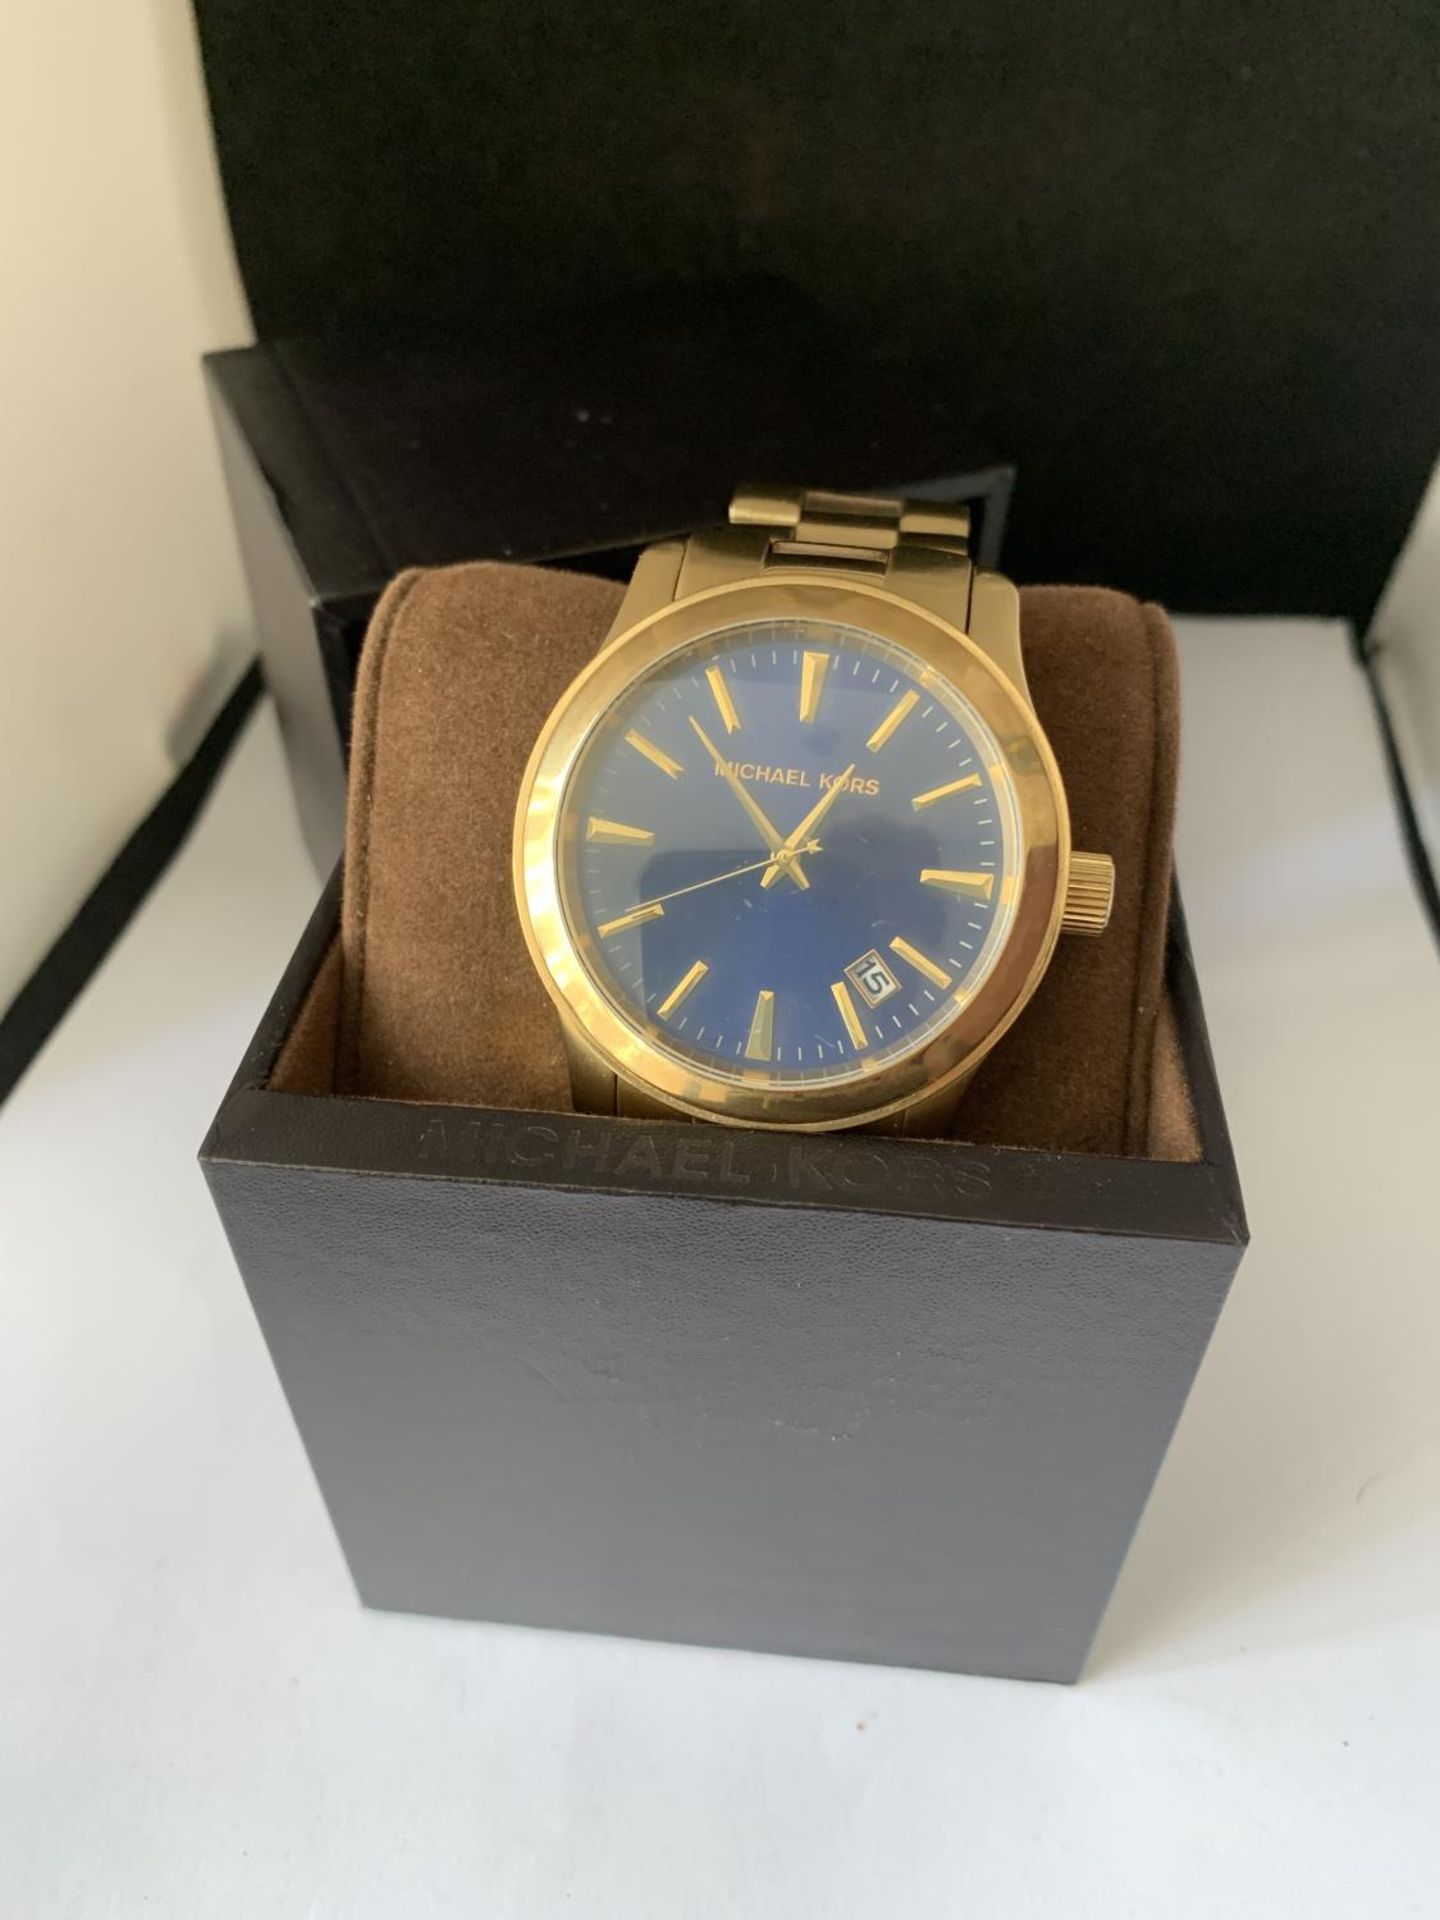 AN AS NEW AND BOXED MICHAEL KORS WRIST WATCH SEEN WORKING BUT NO WARRANTY